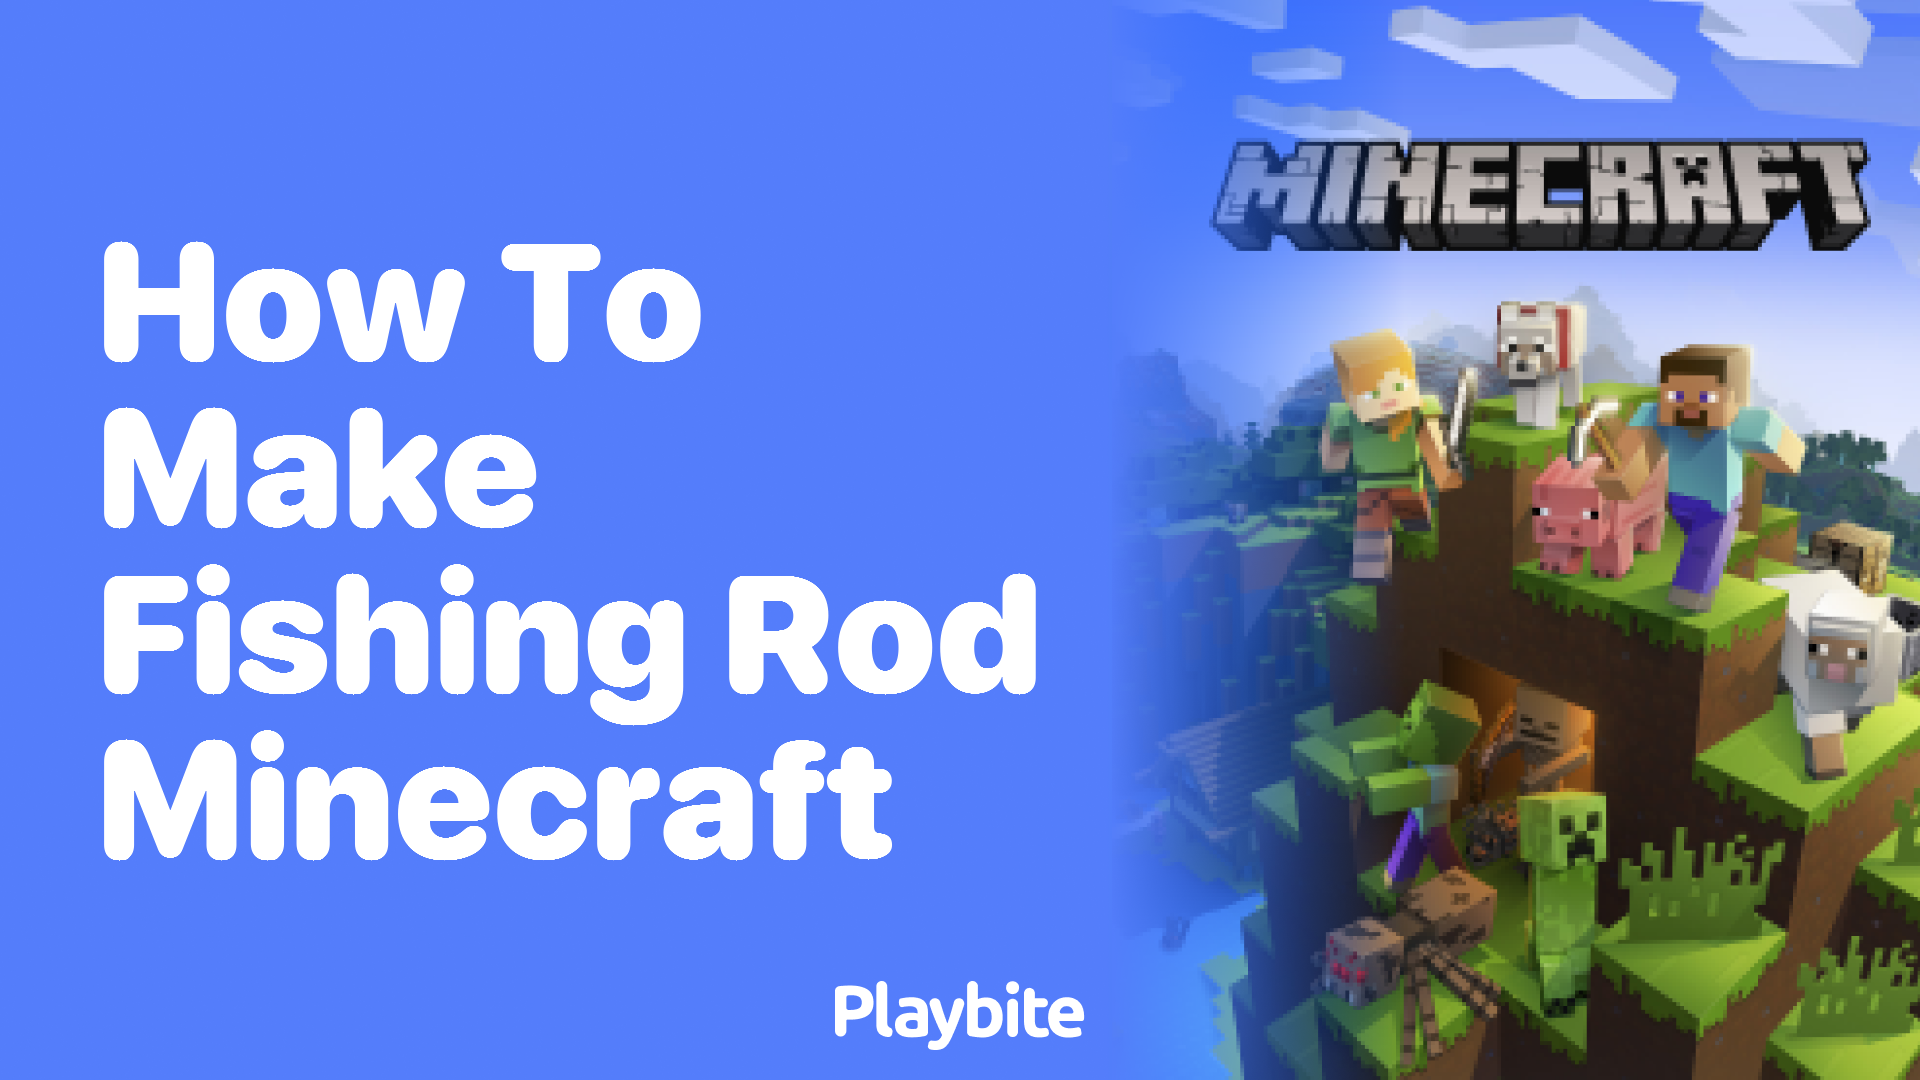 How to make a fishing rod in Minecraft - Playbite